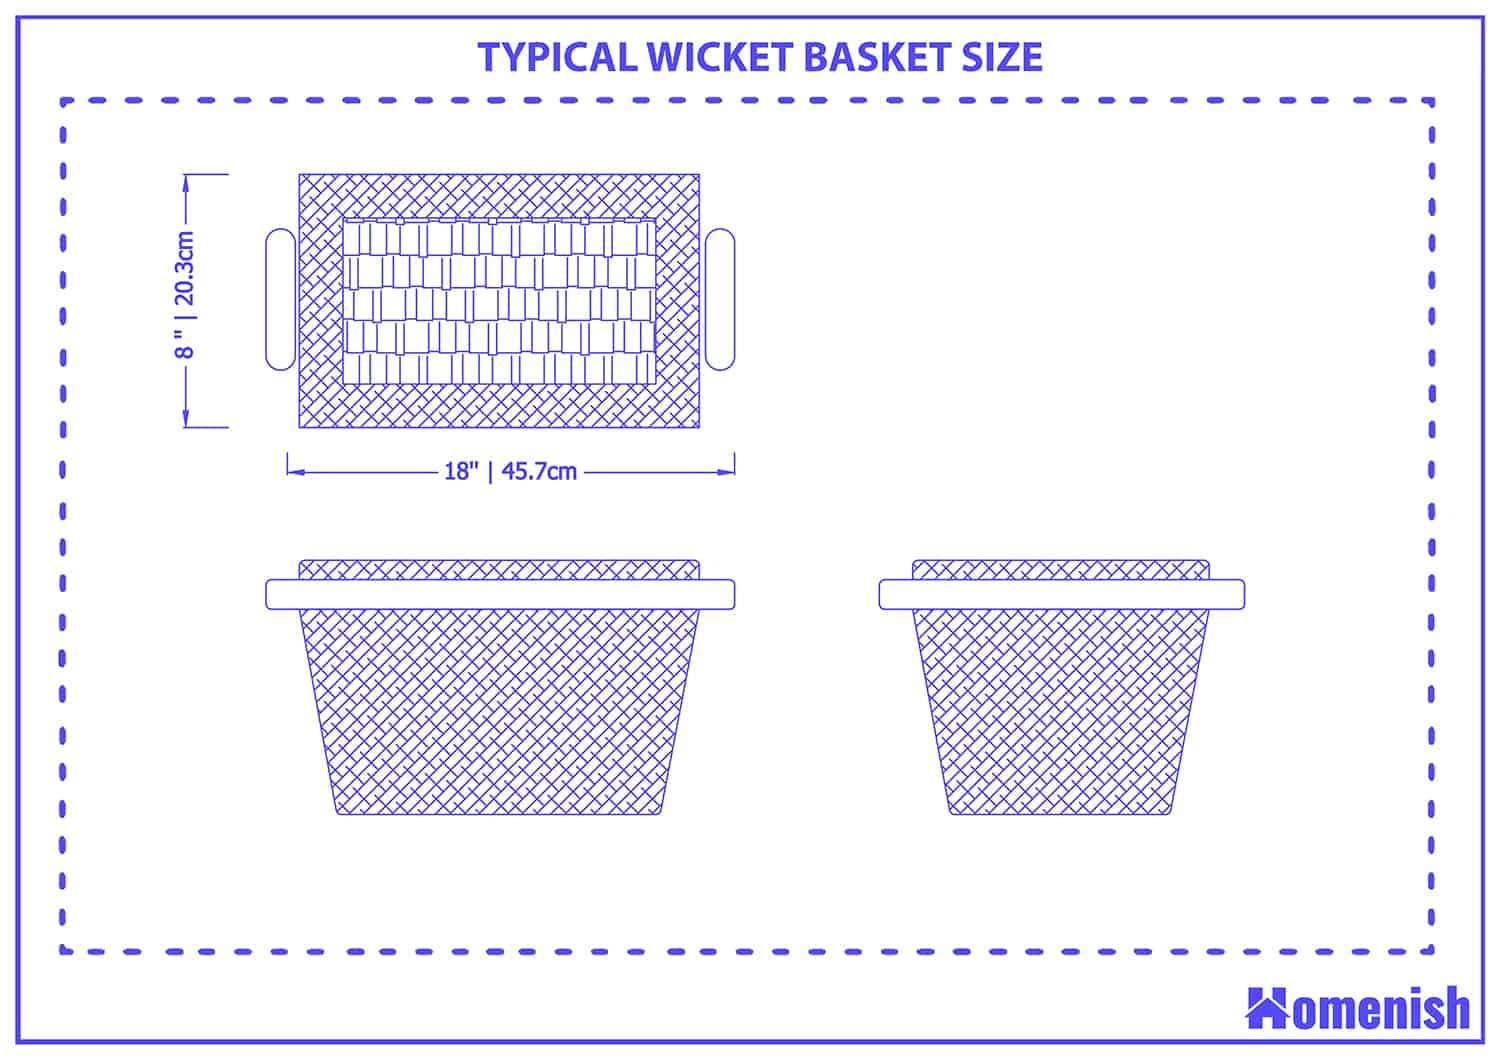 Typical wicket basket size